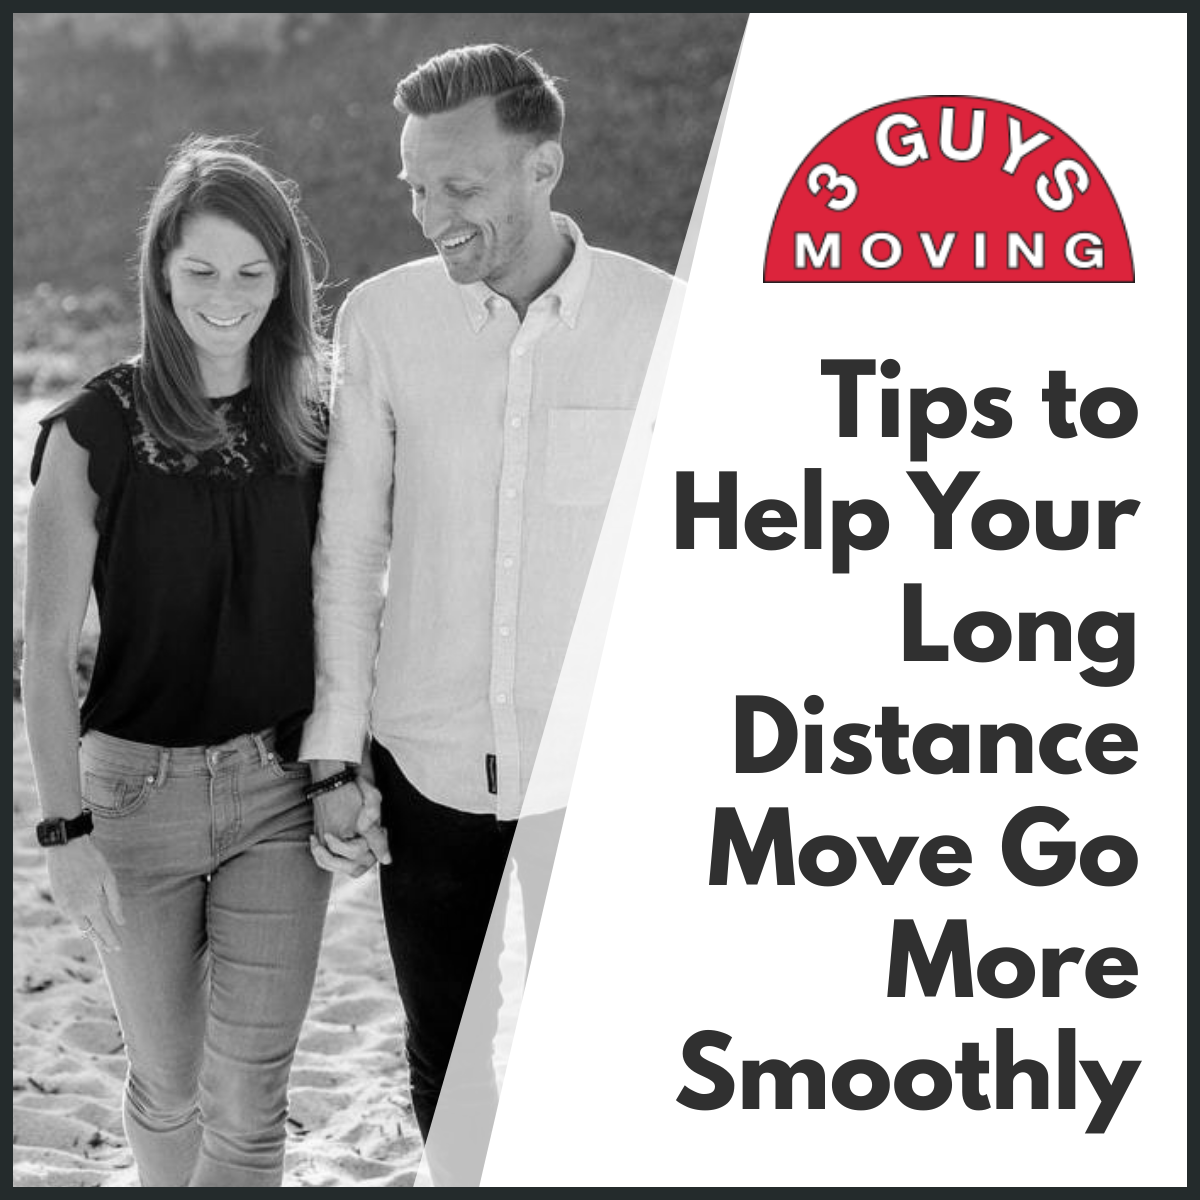 Tips to Help - Tips to Help Your Long Distance Move Go More Smoothly